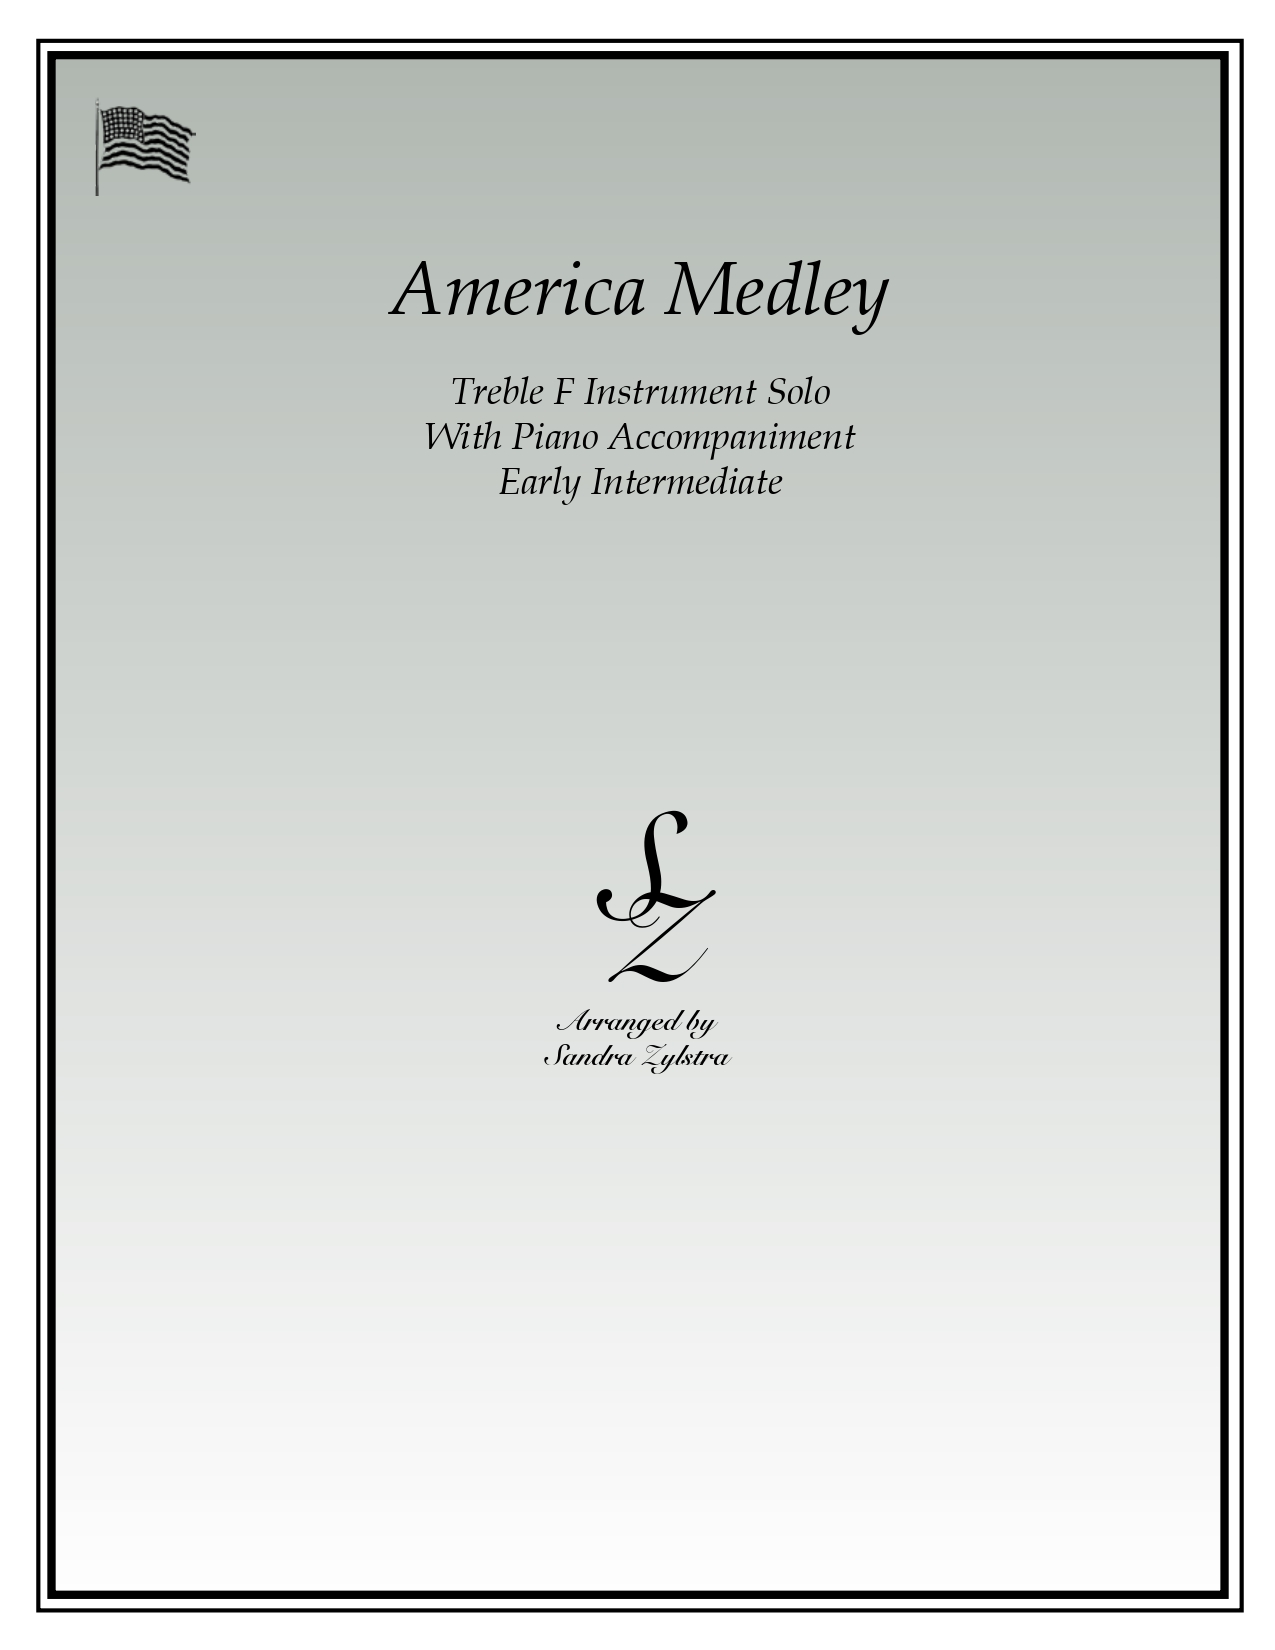 America Medley F instrument solo part cover page 00011